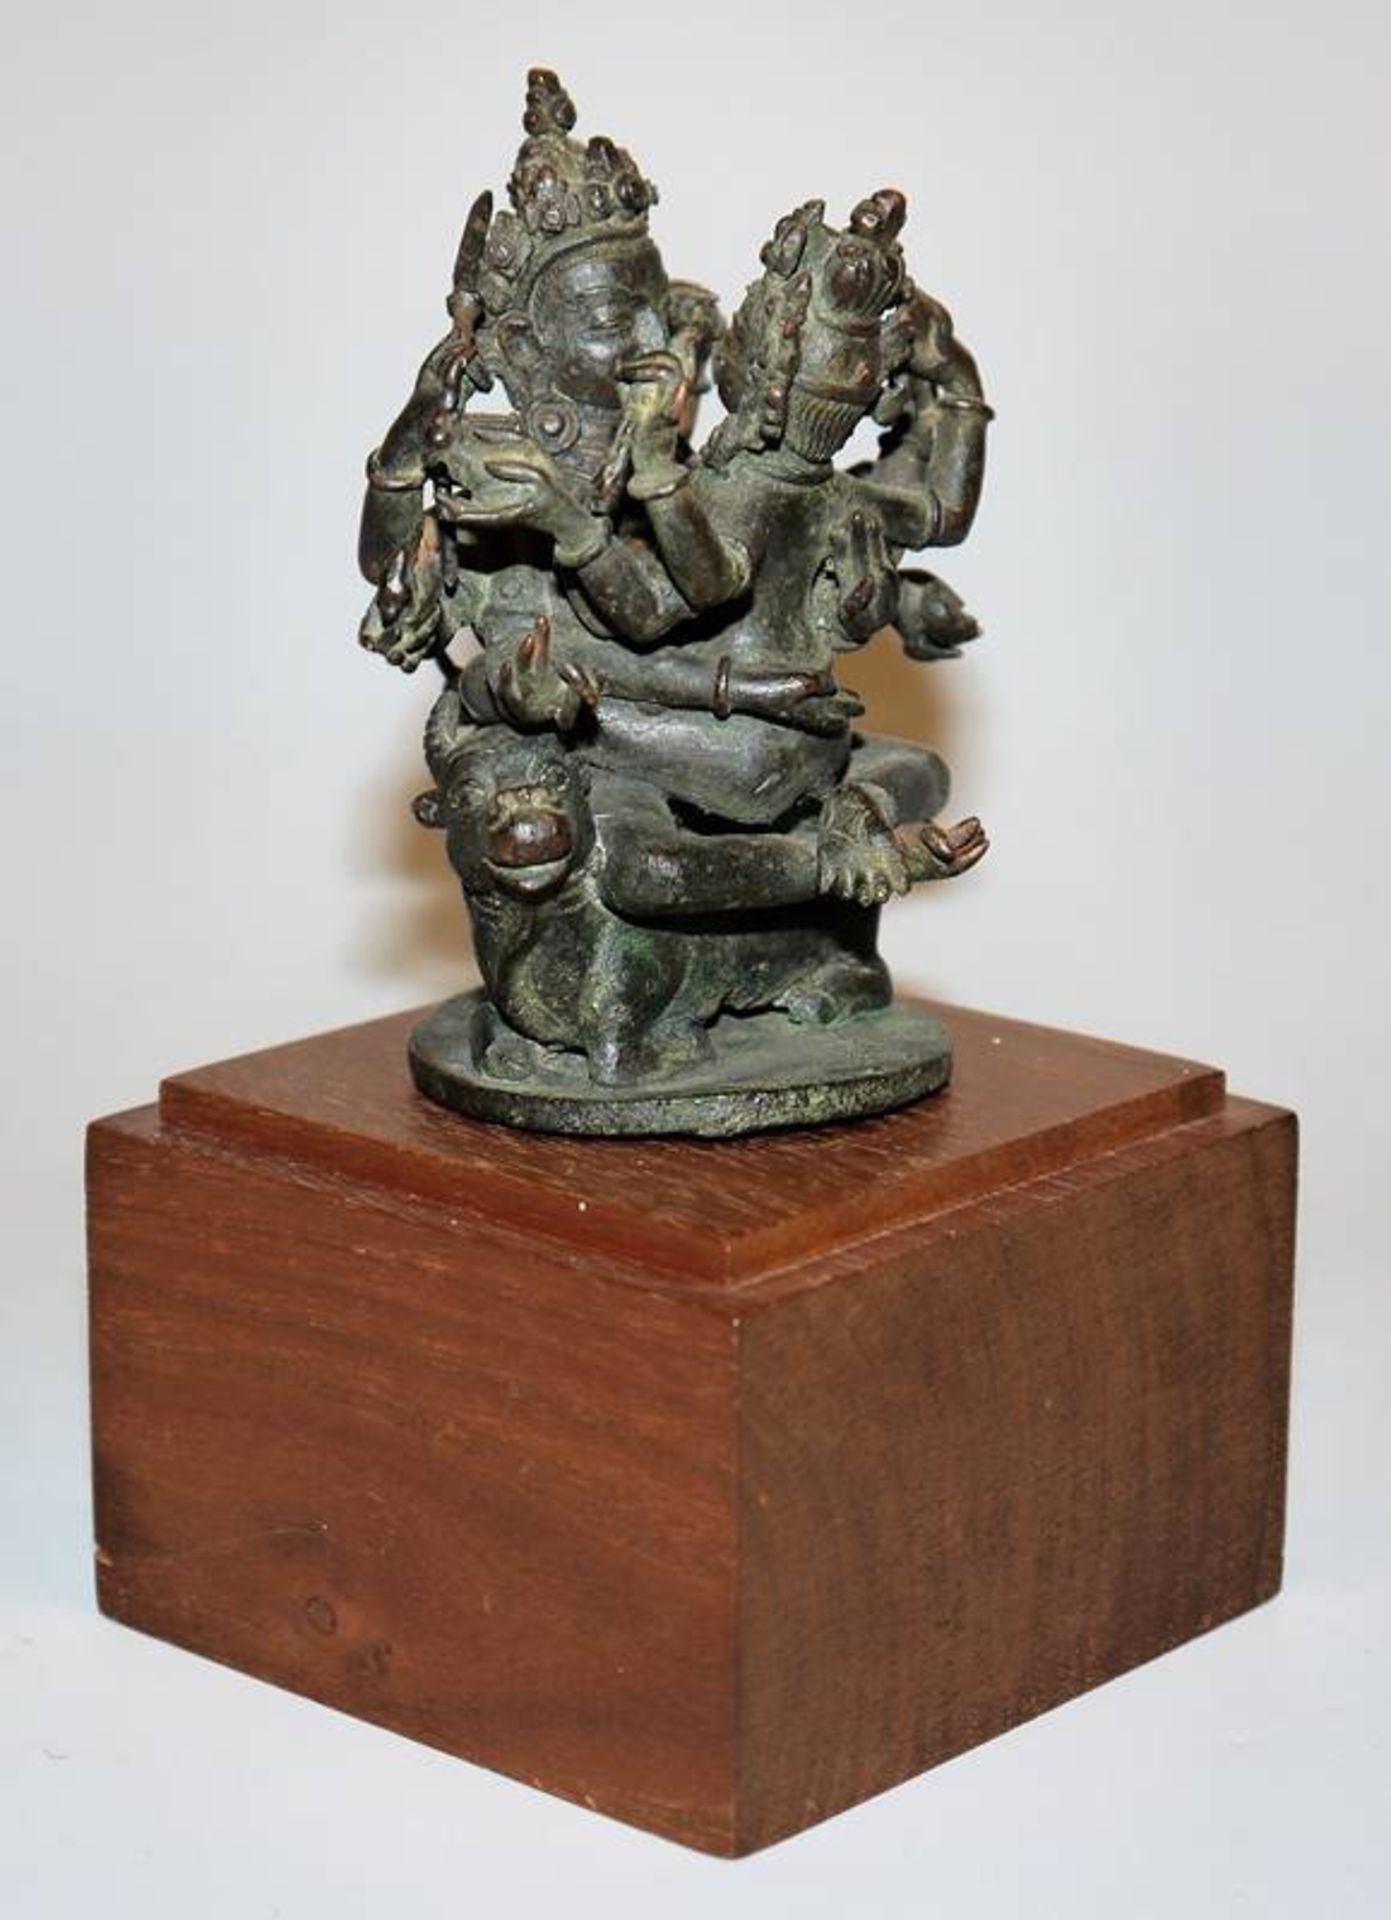 The god Shiva with consort in sexual union, bronze sculpture, Nepal 18th c.